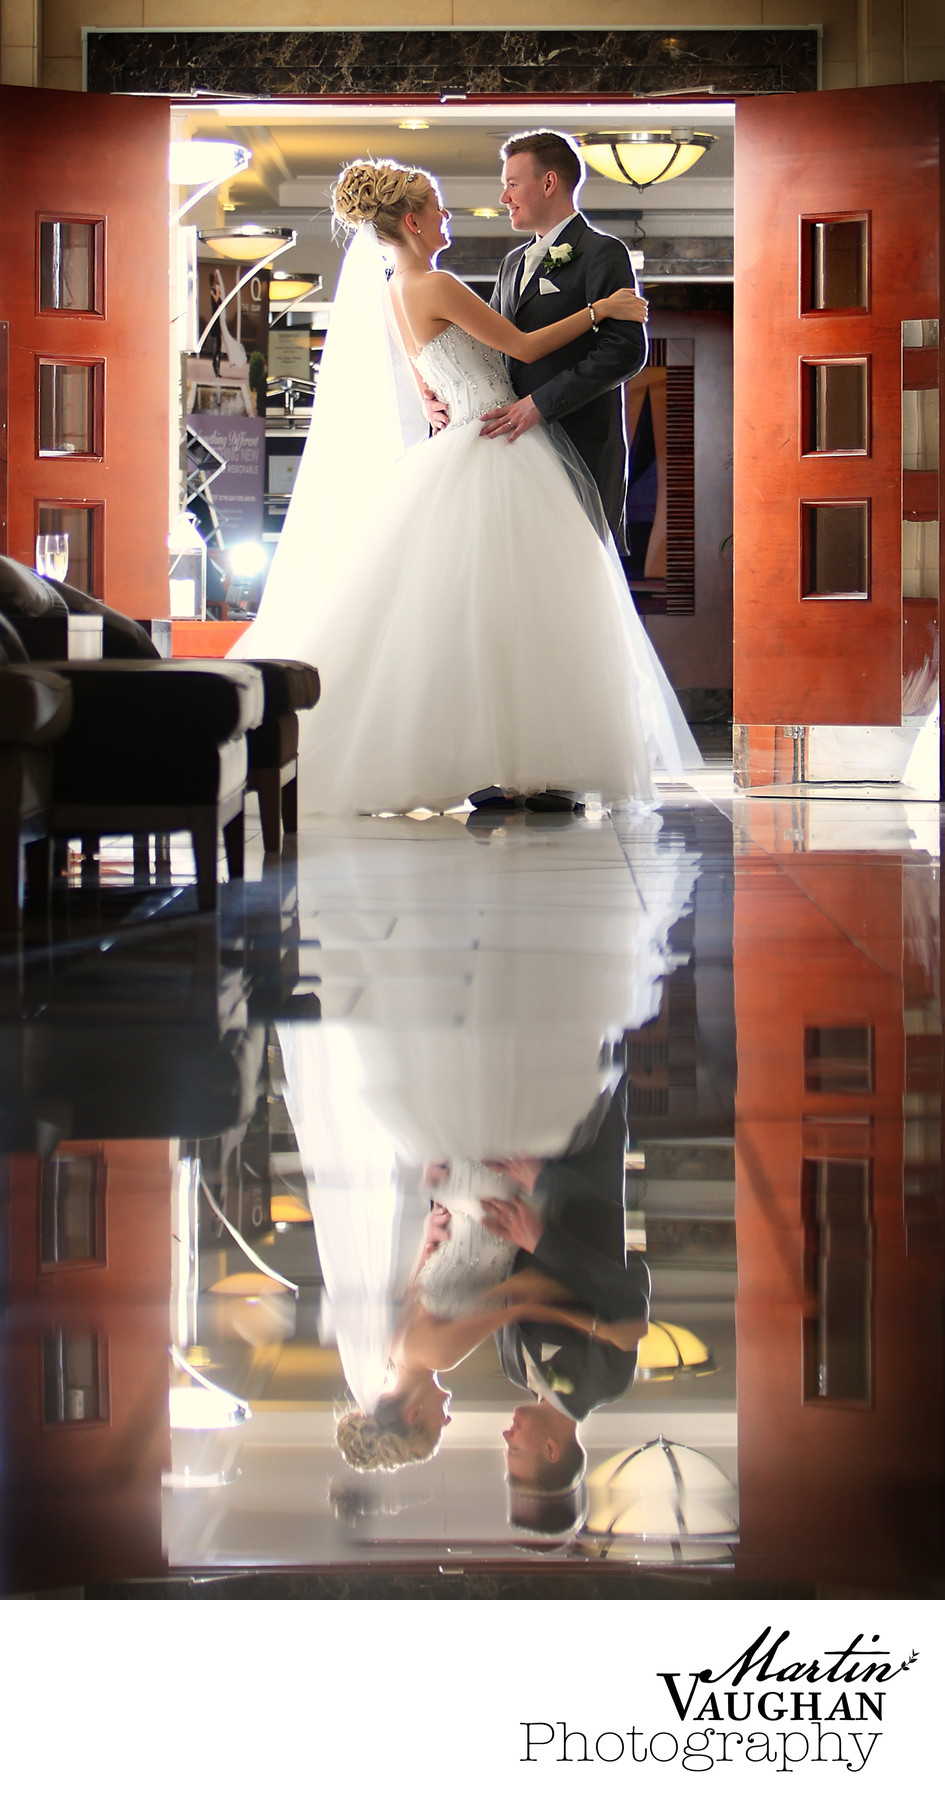 Glamorous wedding photography at Quay Hotel and Spa